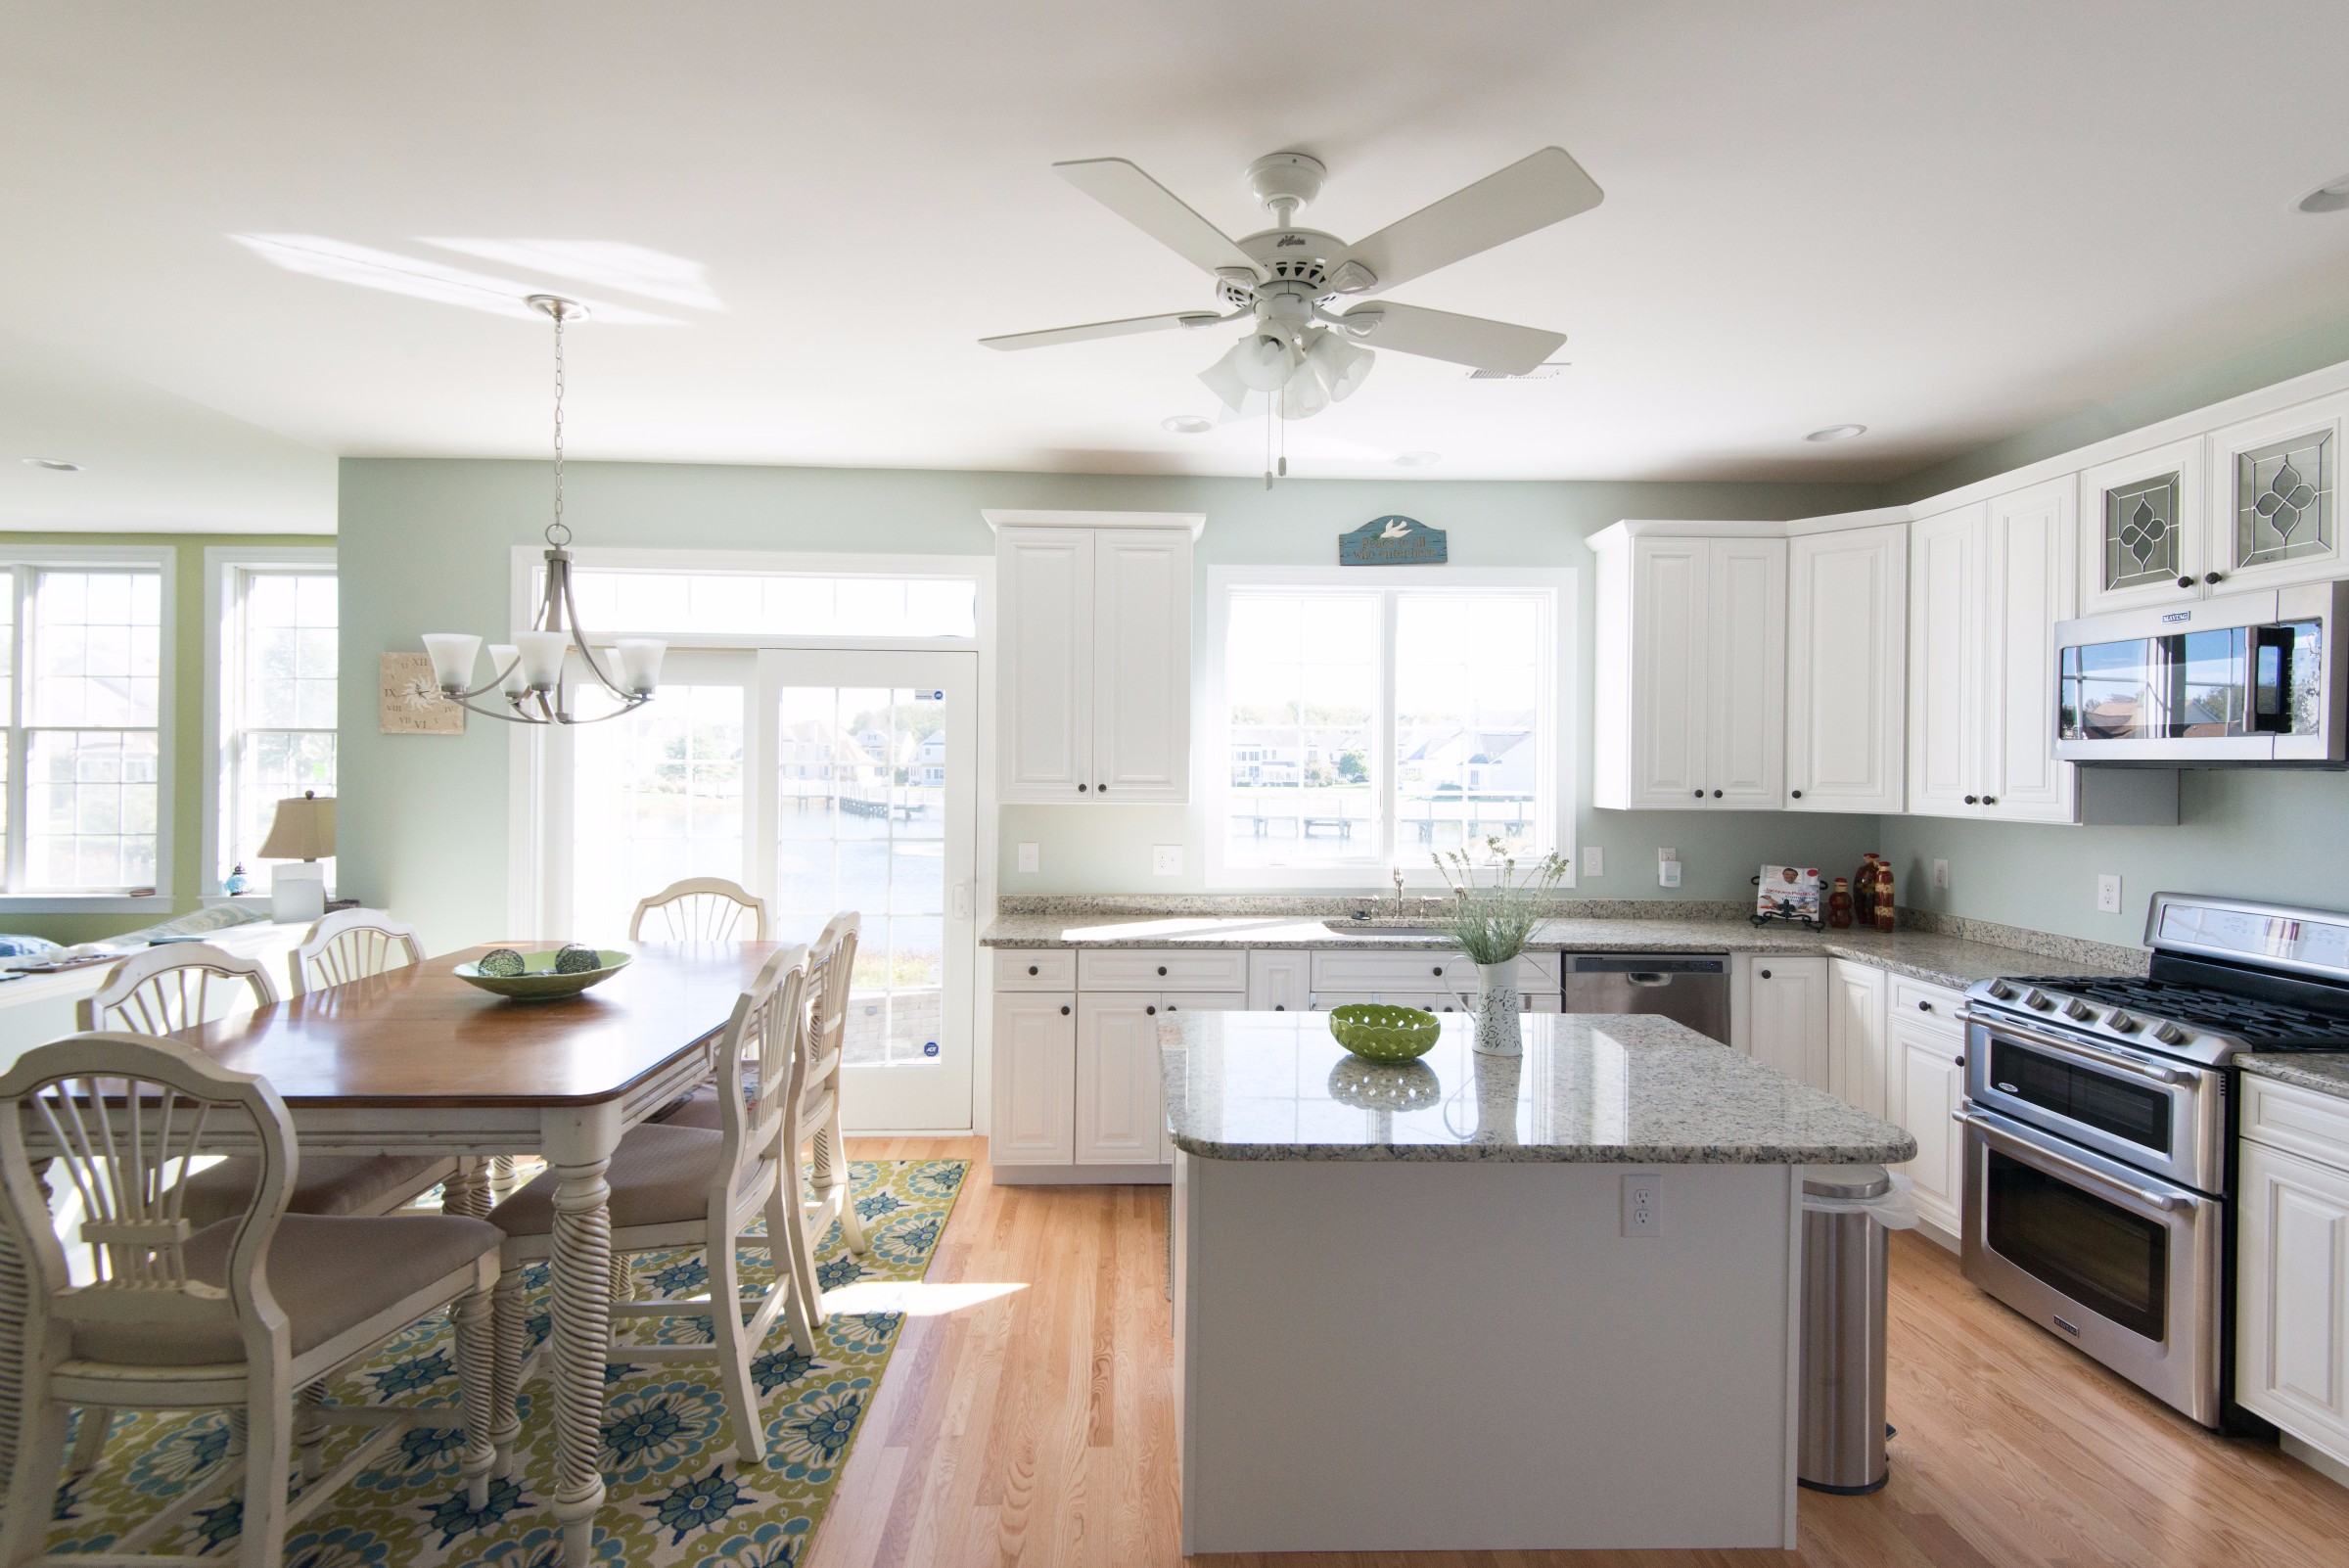 Kitchen Remodel in Bethany Lakes, Bethany Beach DE with Hardwood Flooring, Recessed Can Lights and Chandelier